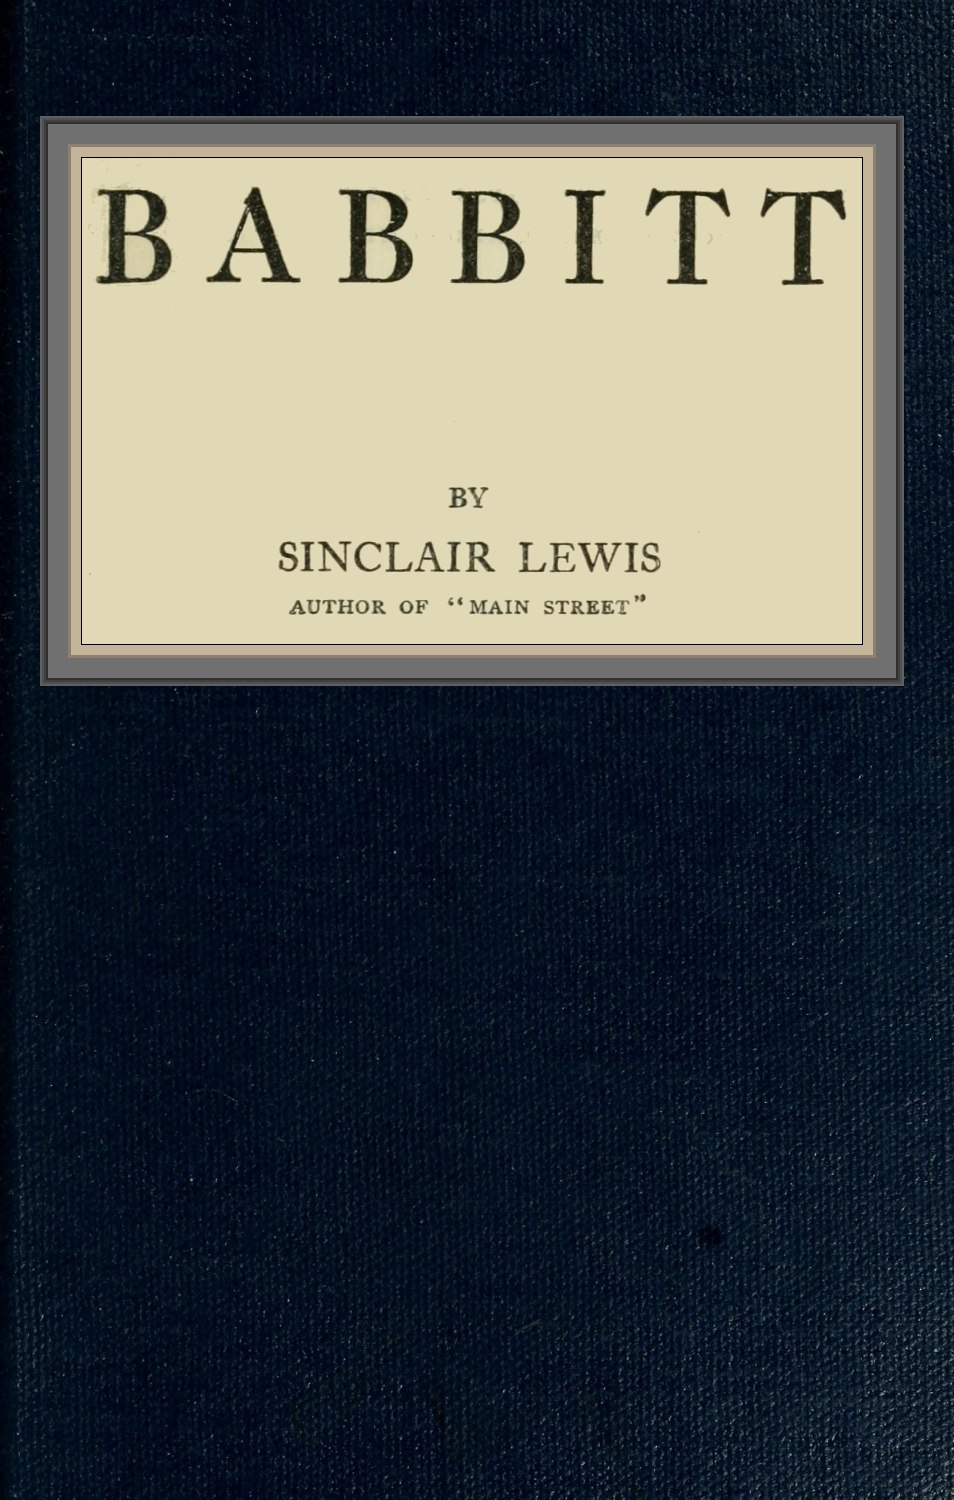 The Project Gutenberg eBook of Babbitt, by Sinclair Lewis.